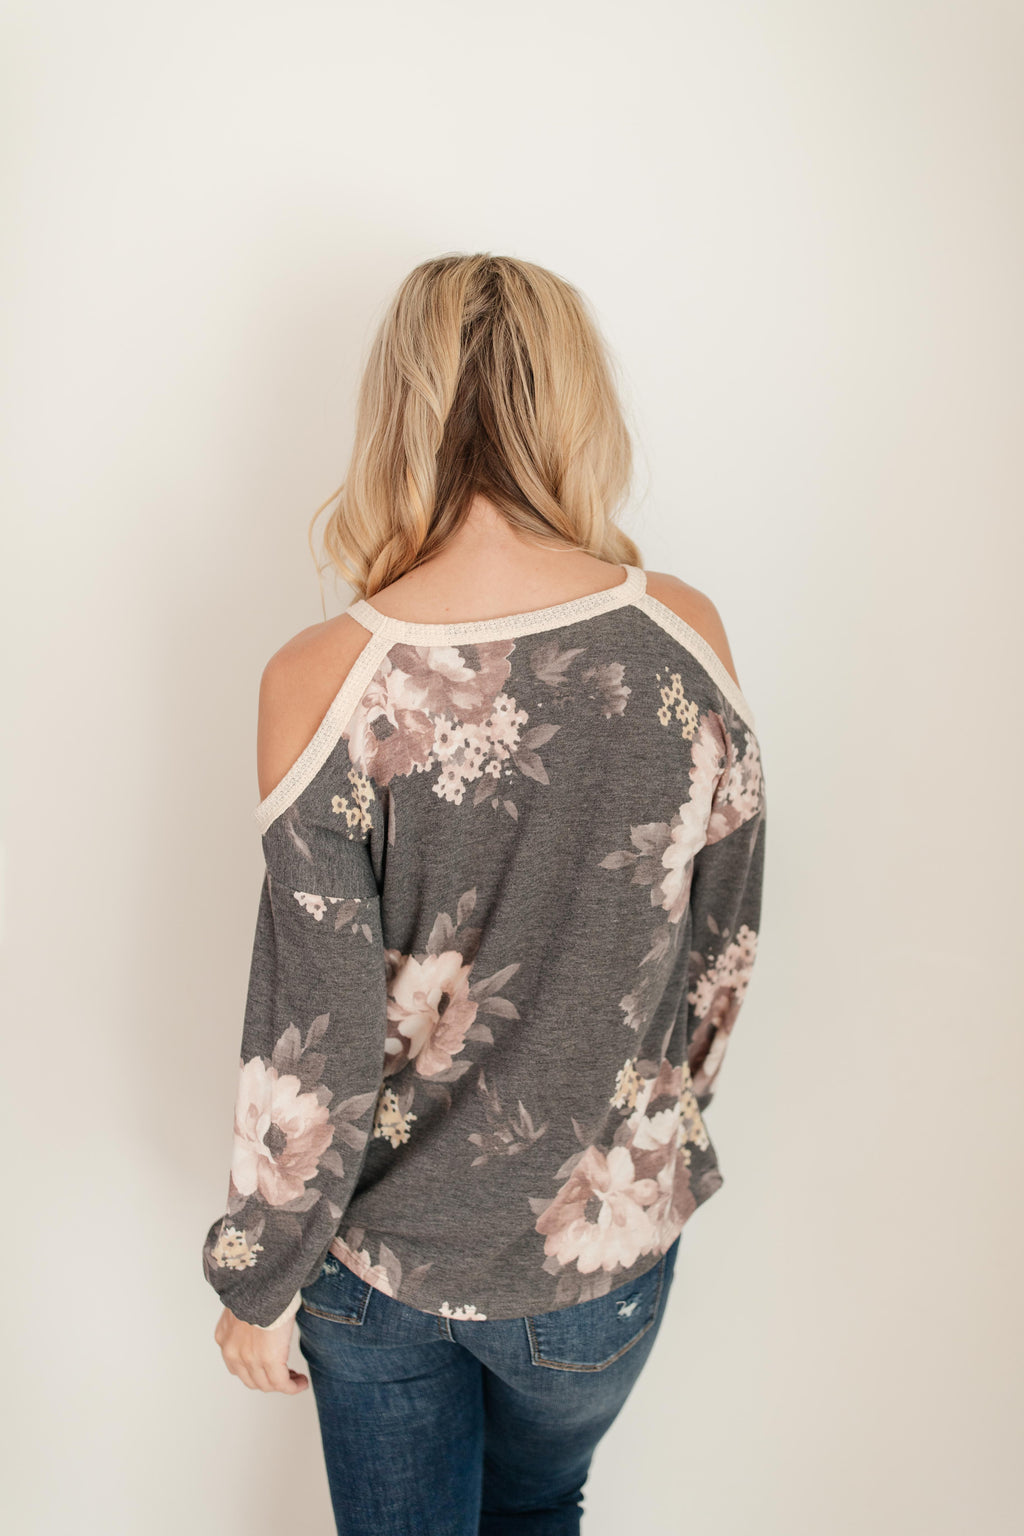 Waffle Meets Floral Top in Charcoal